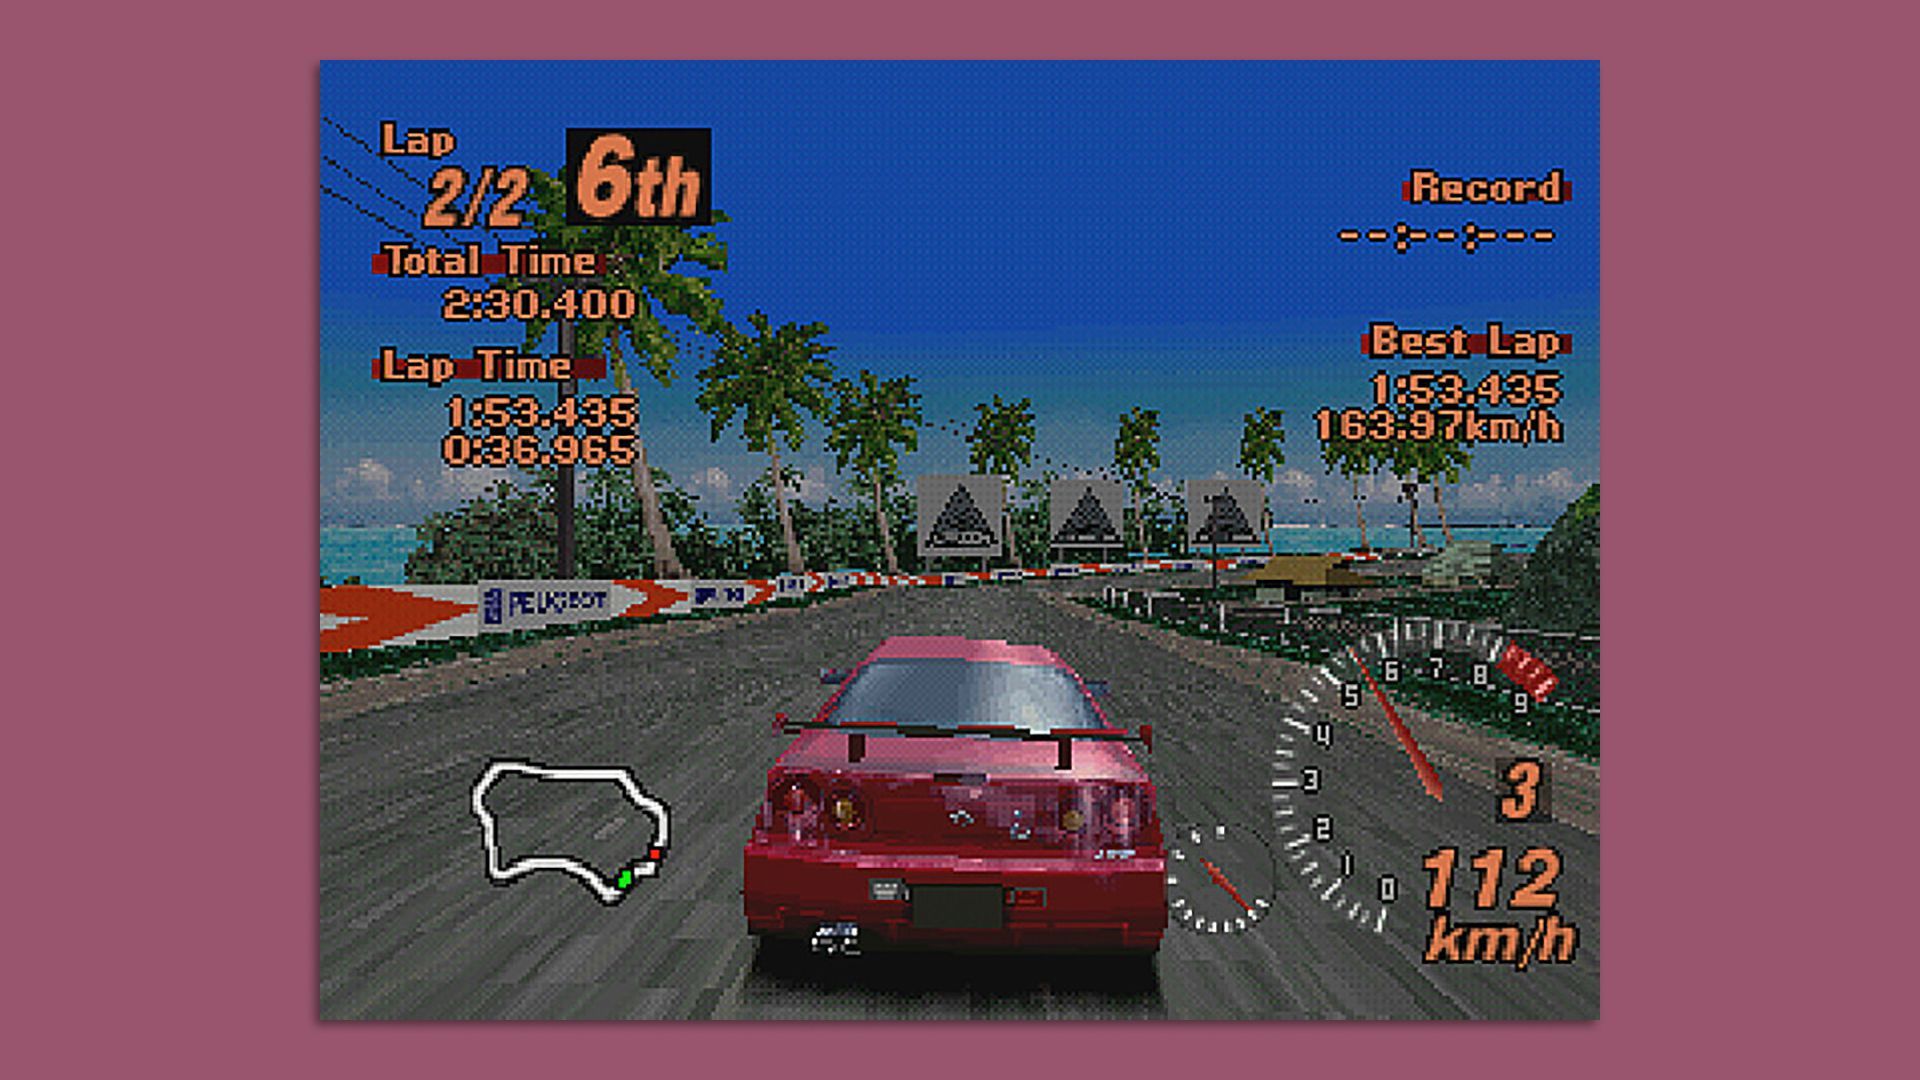 Screenshot of a scene from a video game with a red car racing on a track and meters in graphics around it